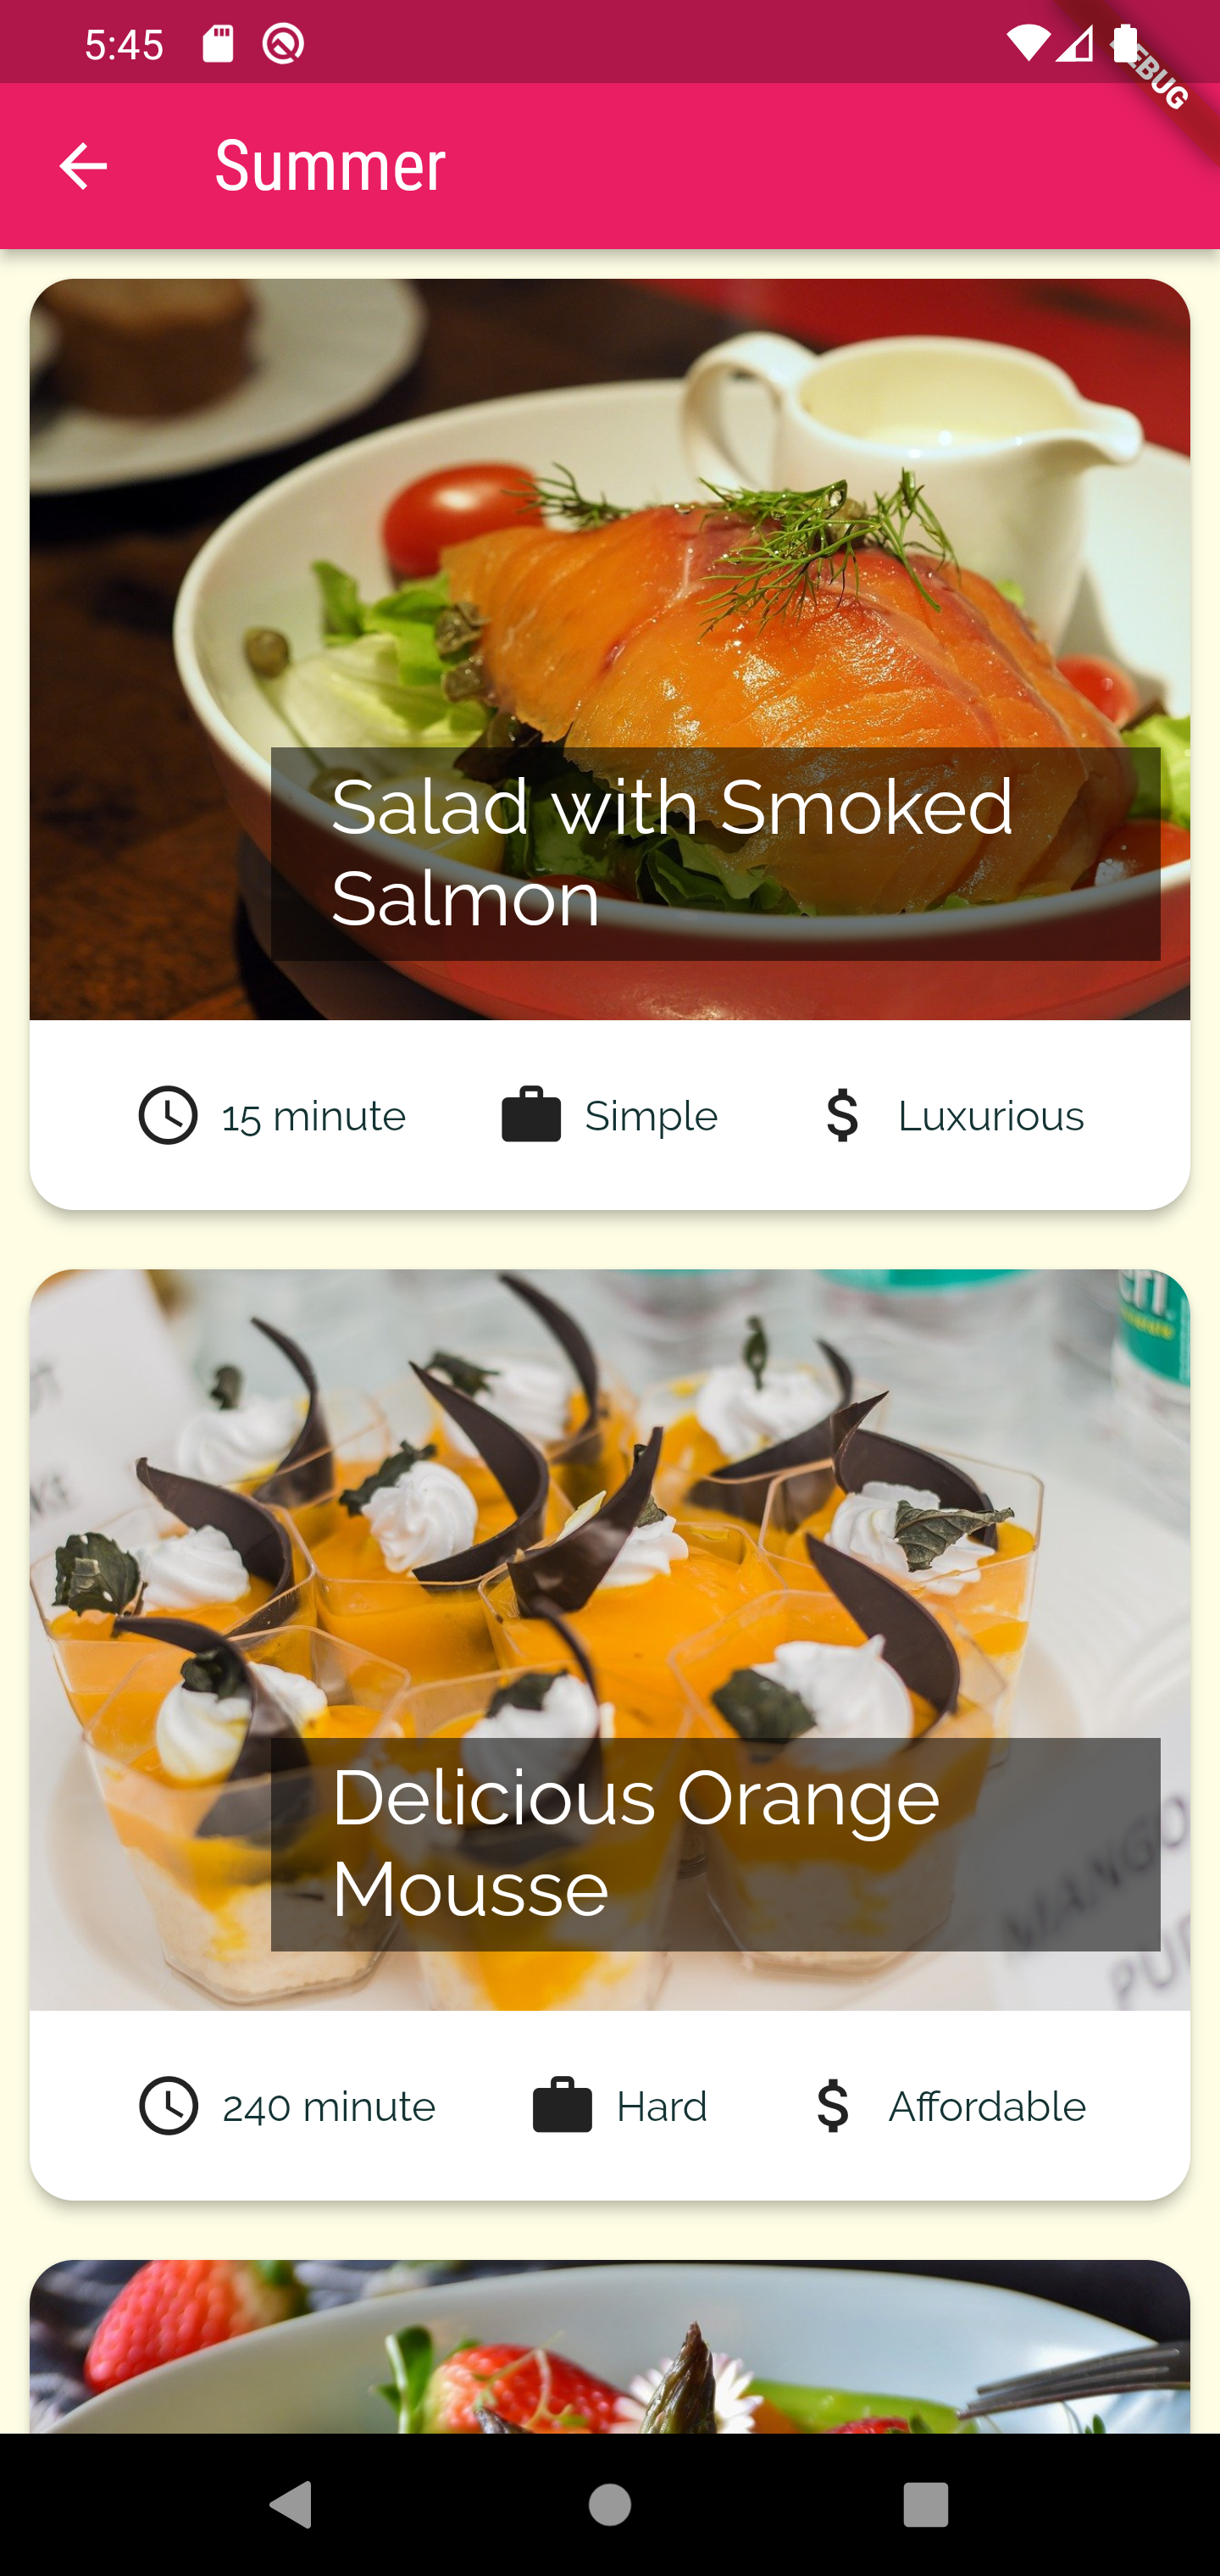 Flutter Meal app Show a selection of meals based on season and type